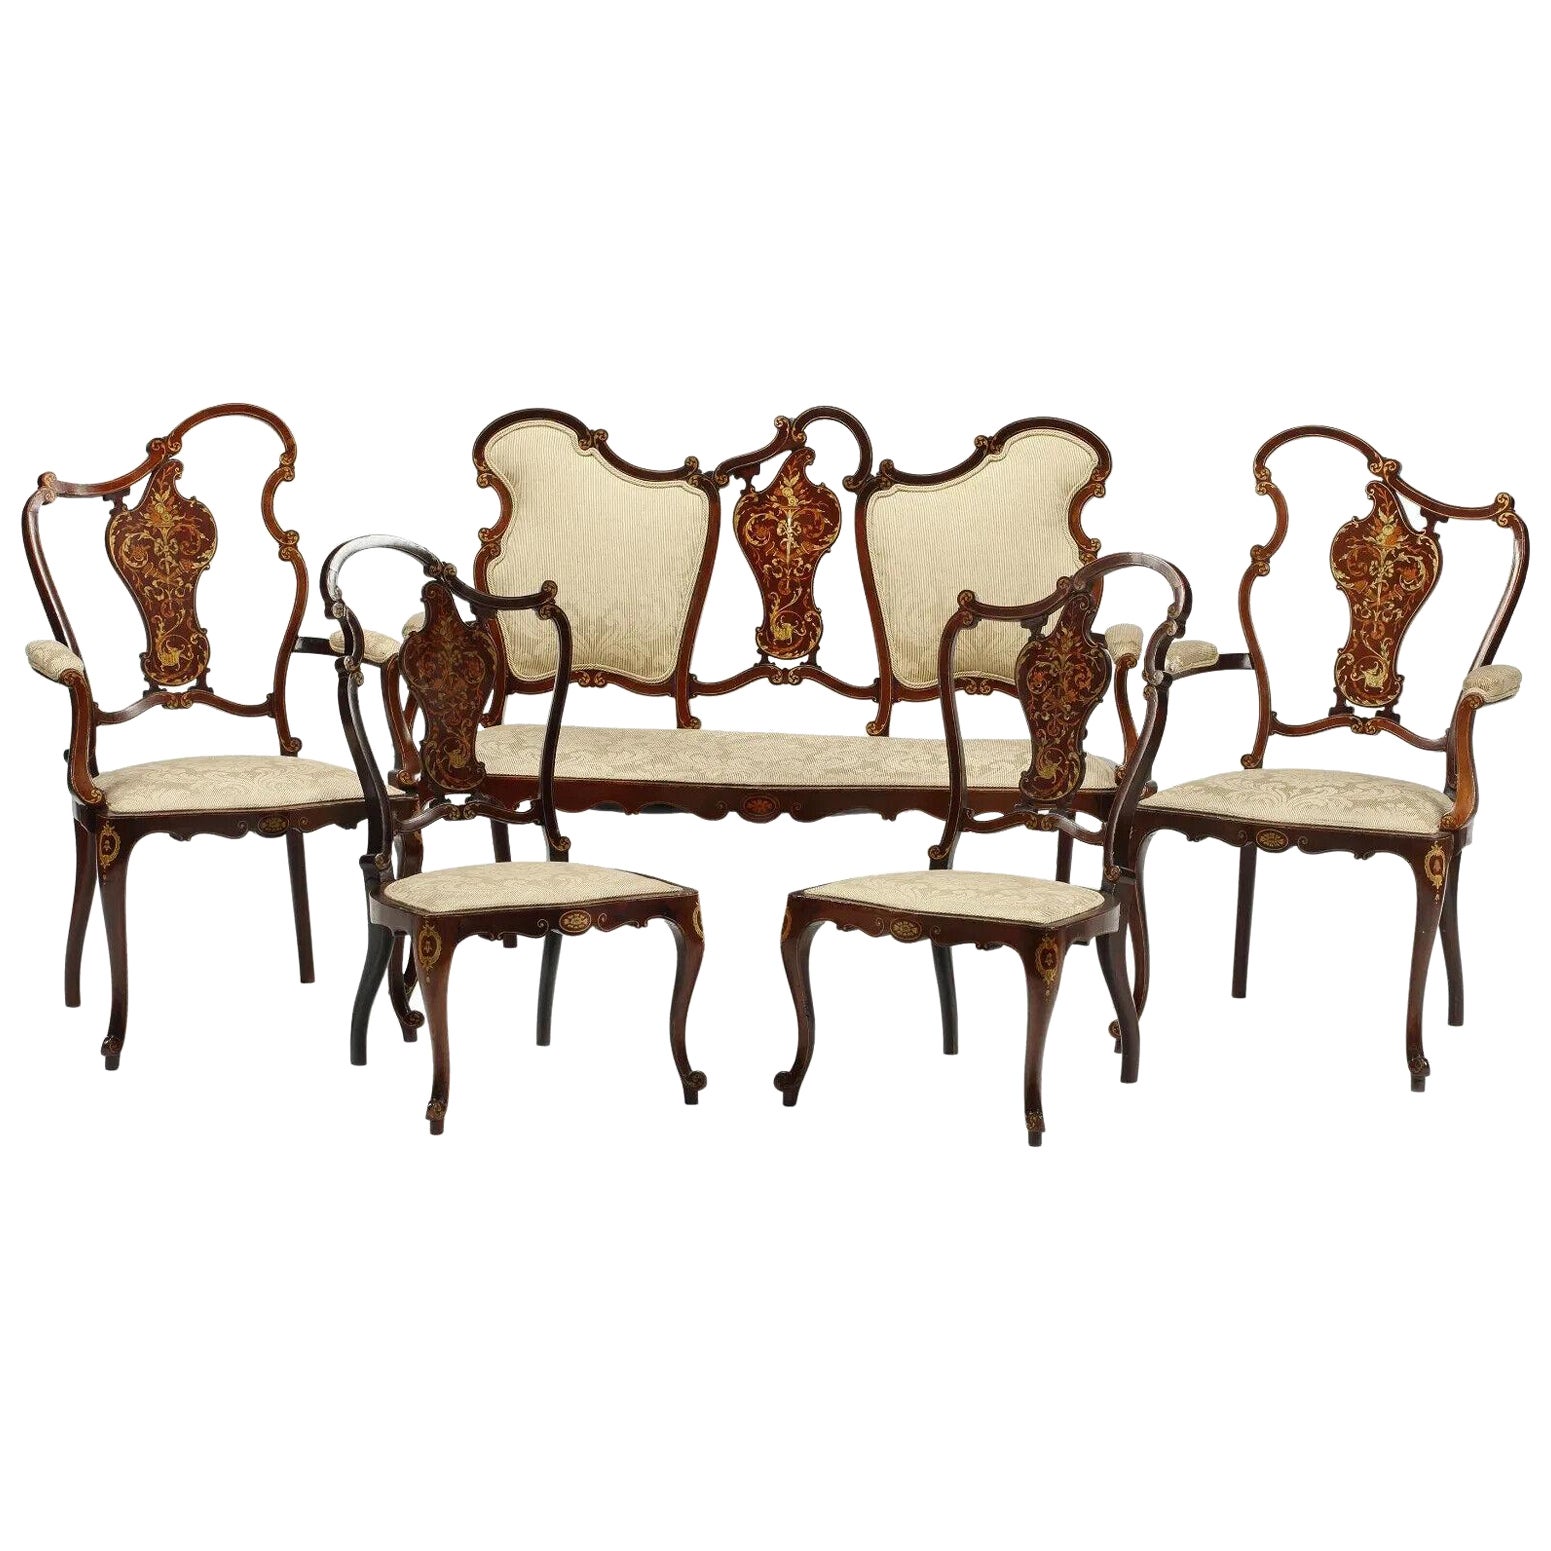 Antique Salon Set, Austrian, Inlaid, 5-Piece Set, Settee with 4 Chairs!! For Sale